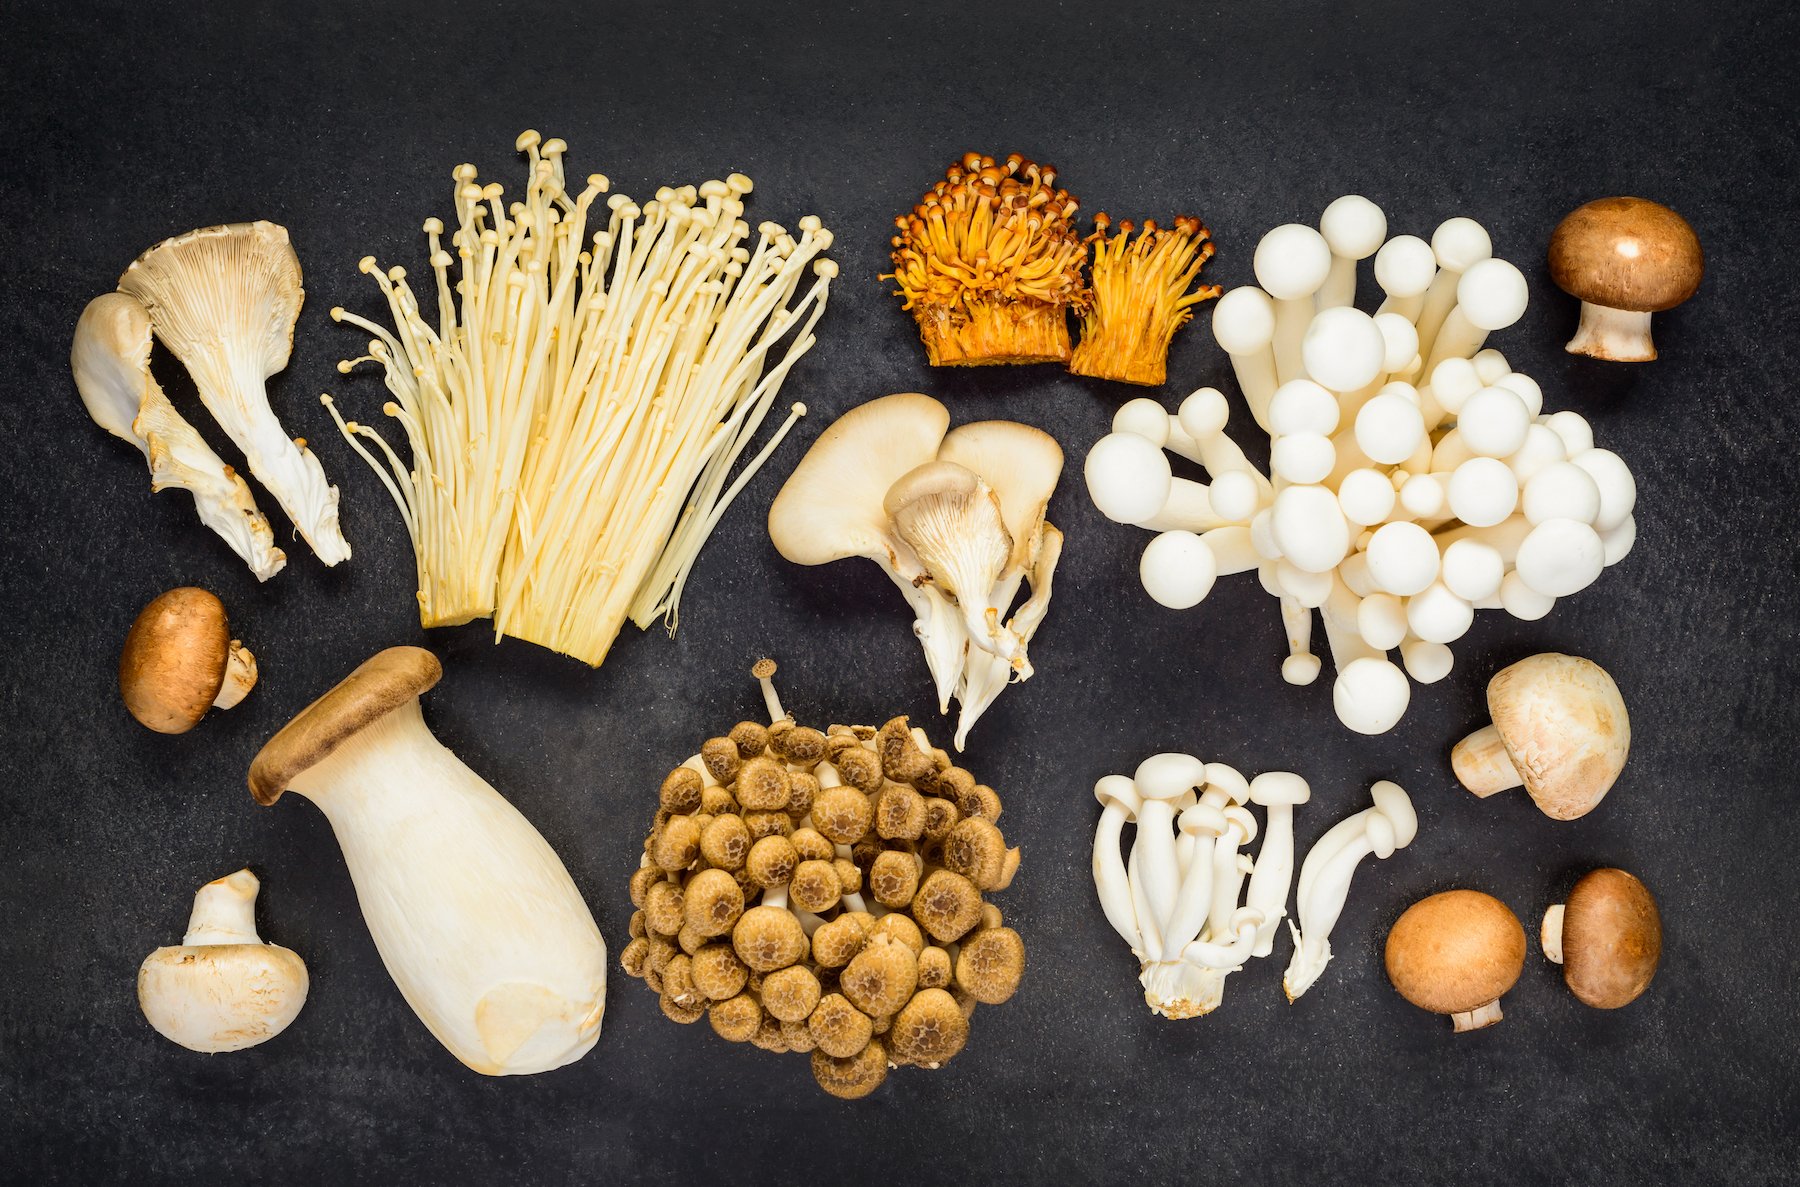 3 Edible Wild Mushrooms (And 5 to Avoid)